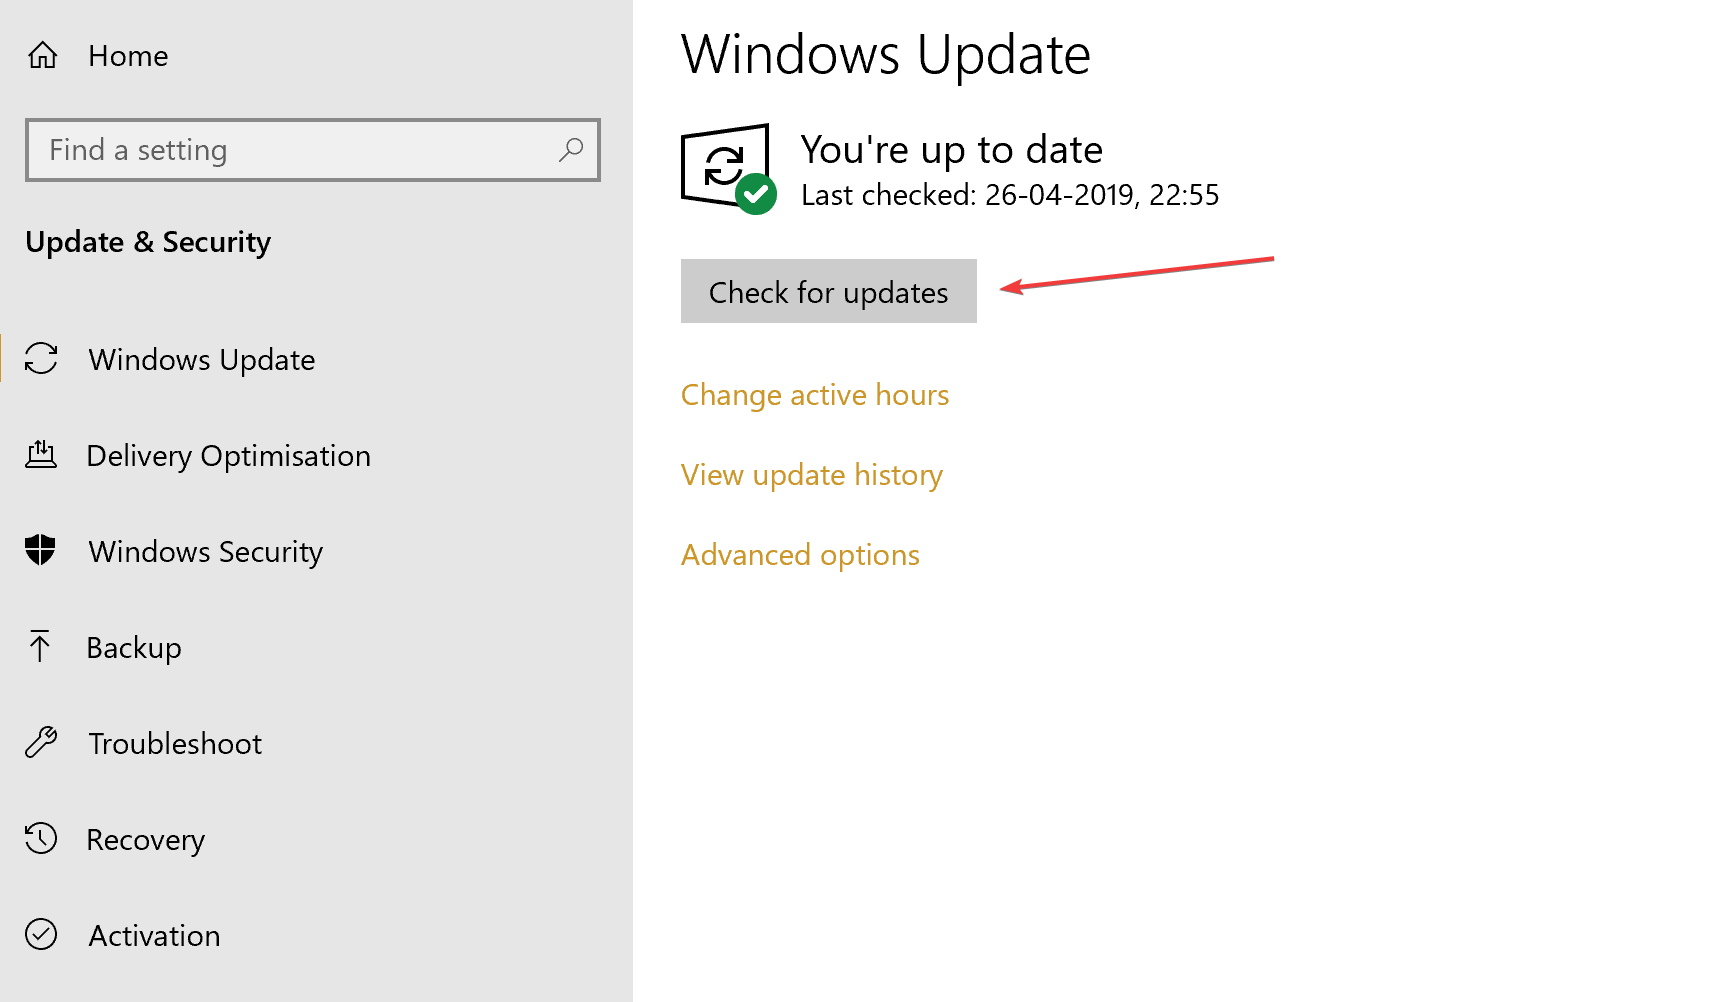 check for updates windows update your system doesn't meet the minimum requirements for this update